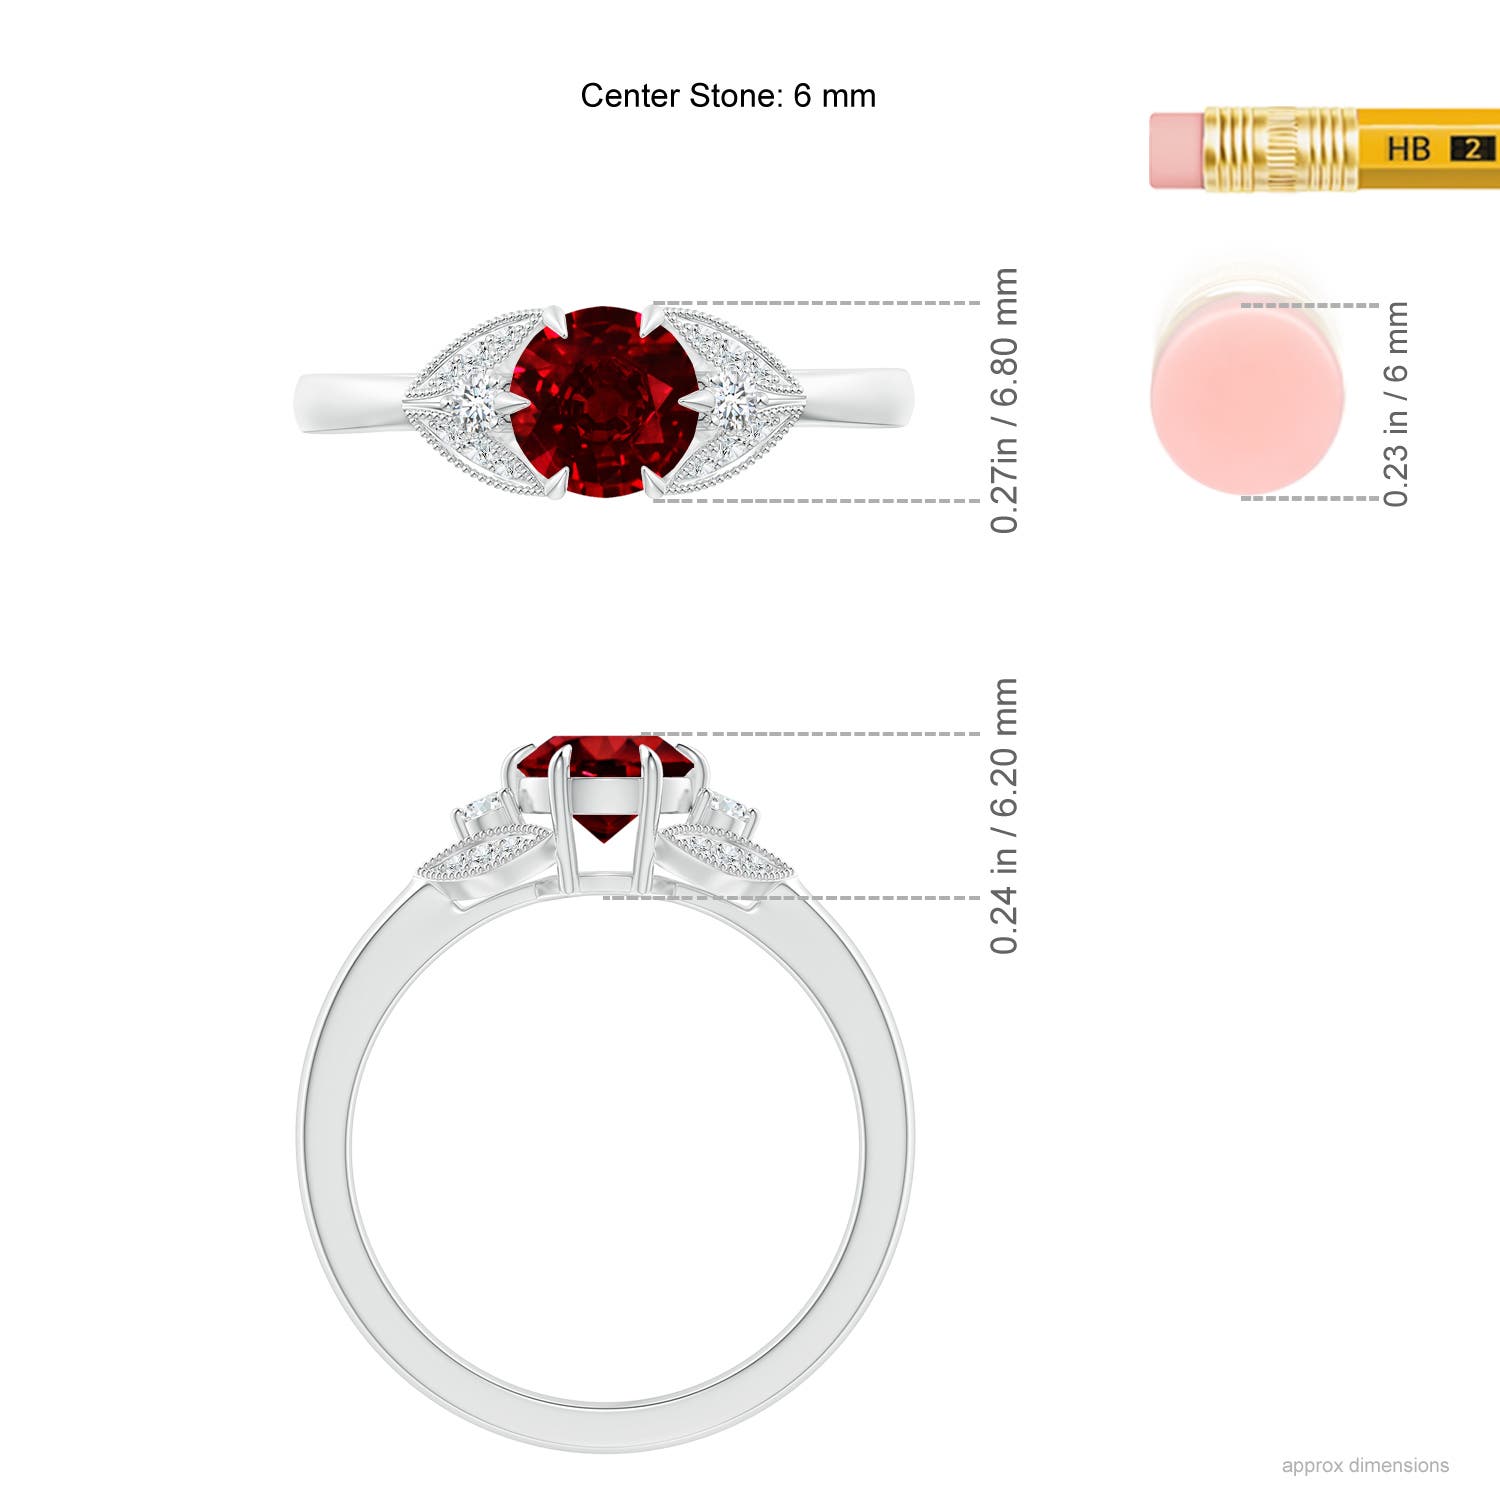 AAAA - Ruby / 1.1 CT / 14 KT White Gold